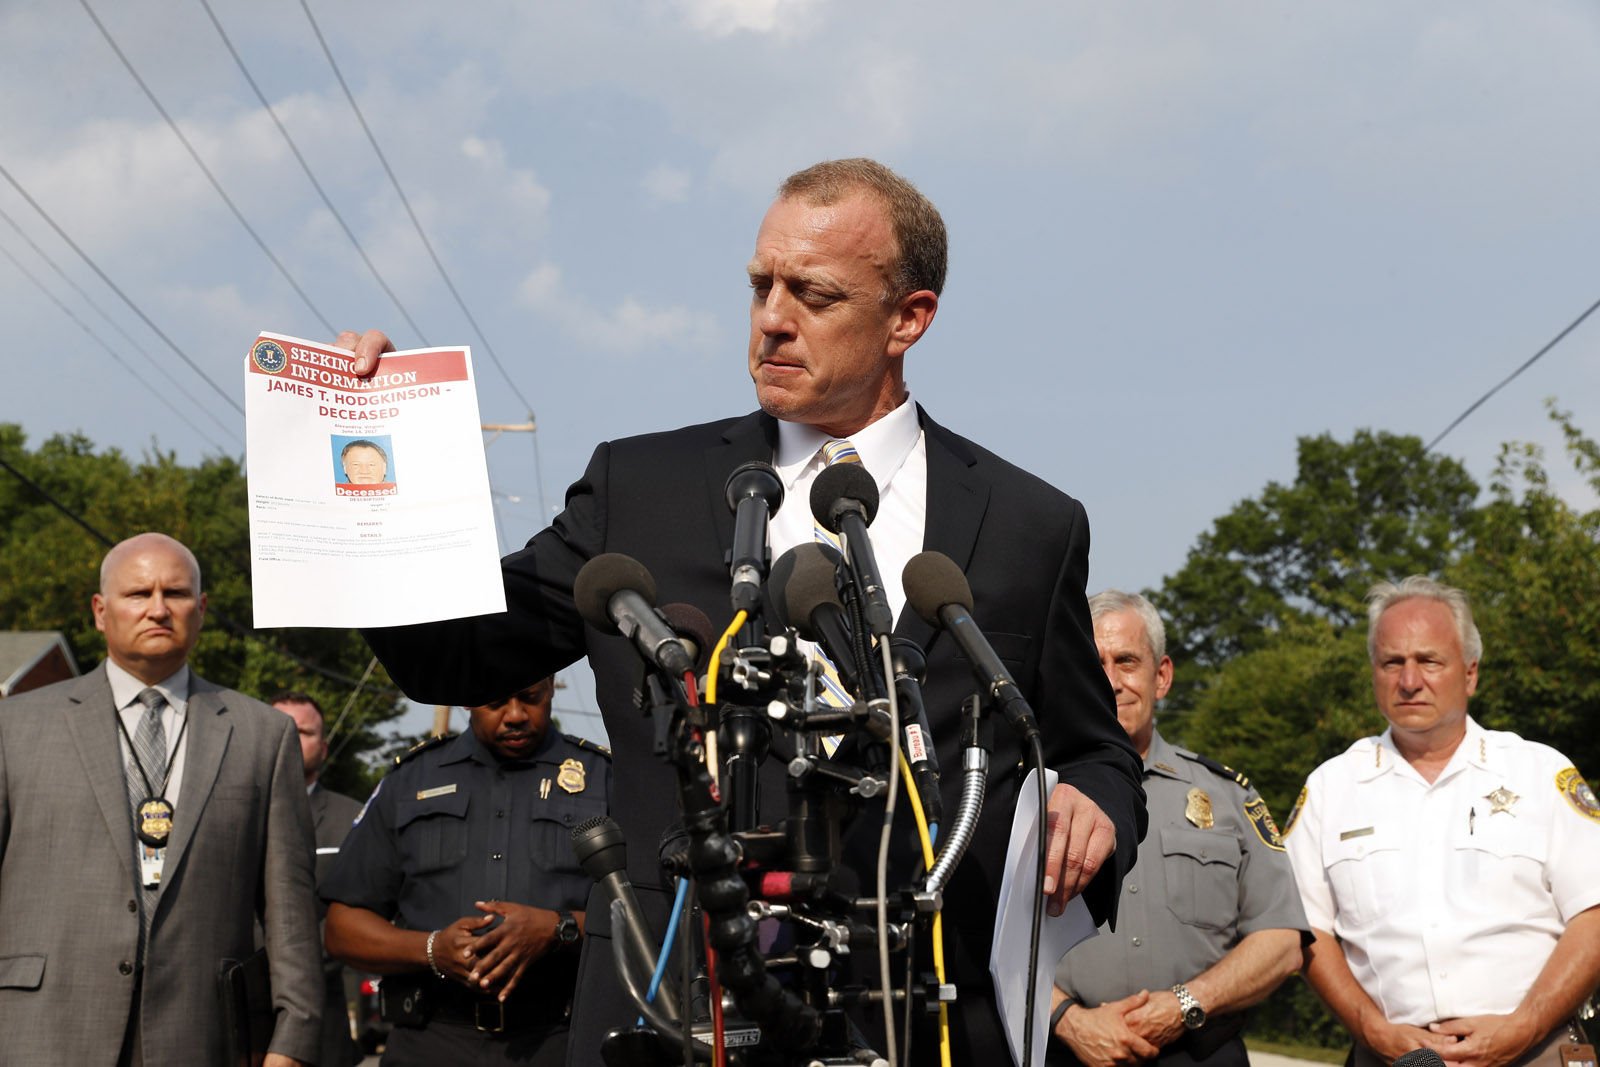 FBI Special Agent in Charge Tim Slater holds up a flyer looking for information about the deceased suspect James T. Hodgkinson, during a media availability Wednesday, June 14, 2017, in Alexandria, Va. A rifle-wielding attacker opened fire on Republican lawmakers as they practiced for a charity baseball game, critically wounding House GOP Whip Steve Scalise of Louisiana and hitting aides and Capitol police as congressmen and others dove for cover.  (AP Photo/Alex Brandon)